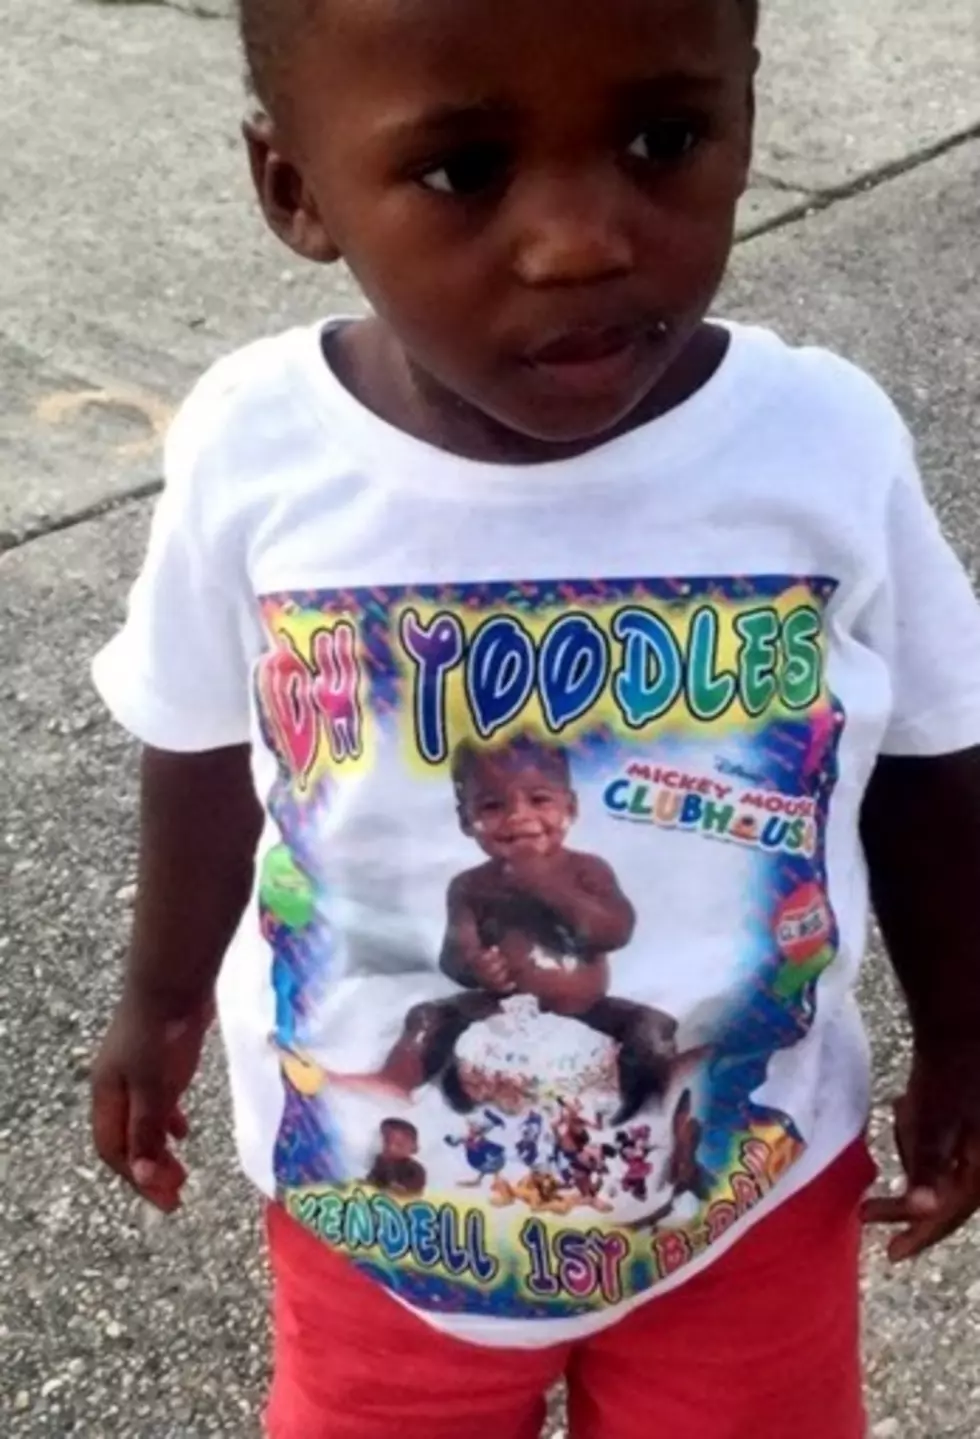 UPDATE: Little Boy Has Been Found; New Orleans Toddler Missing